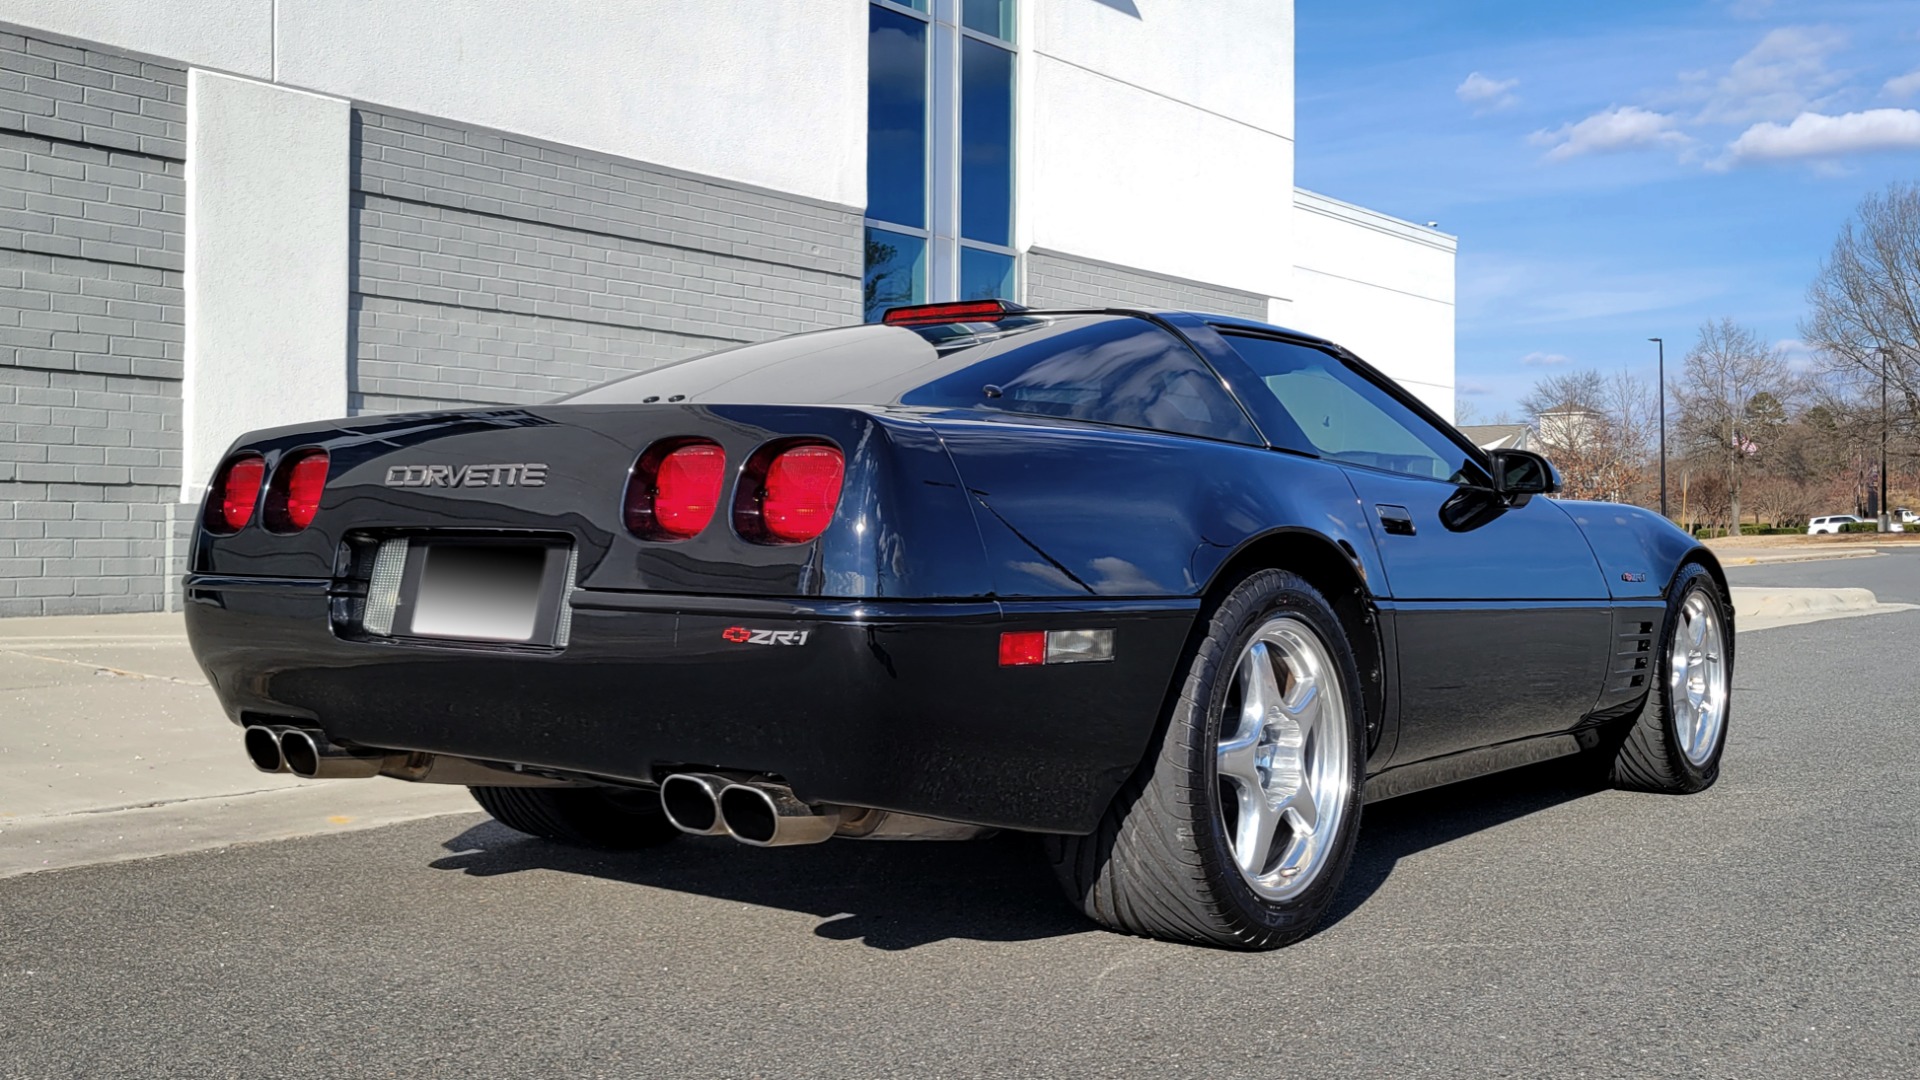 Used 1994 Chevrolet CORVETTE ZR1 COUPE (405HP+) / 6-SPEED MANUAL / 2-TOPS / LOW MILES for sale $49,995 at Formula Imports in Charlotte NC 28227 8